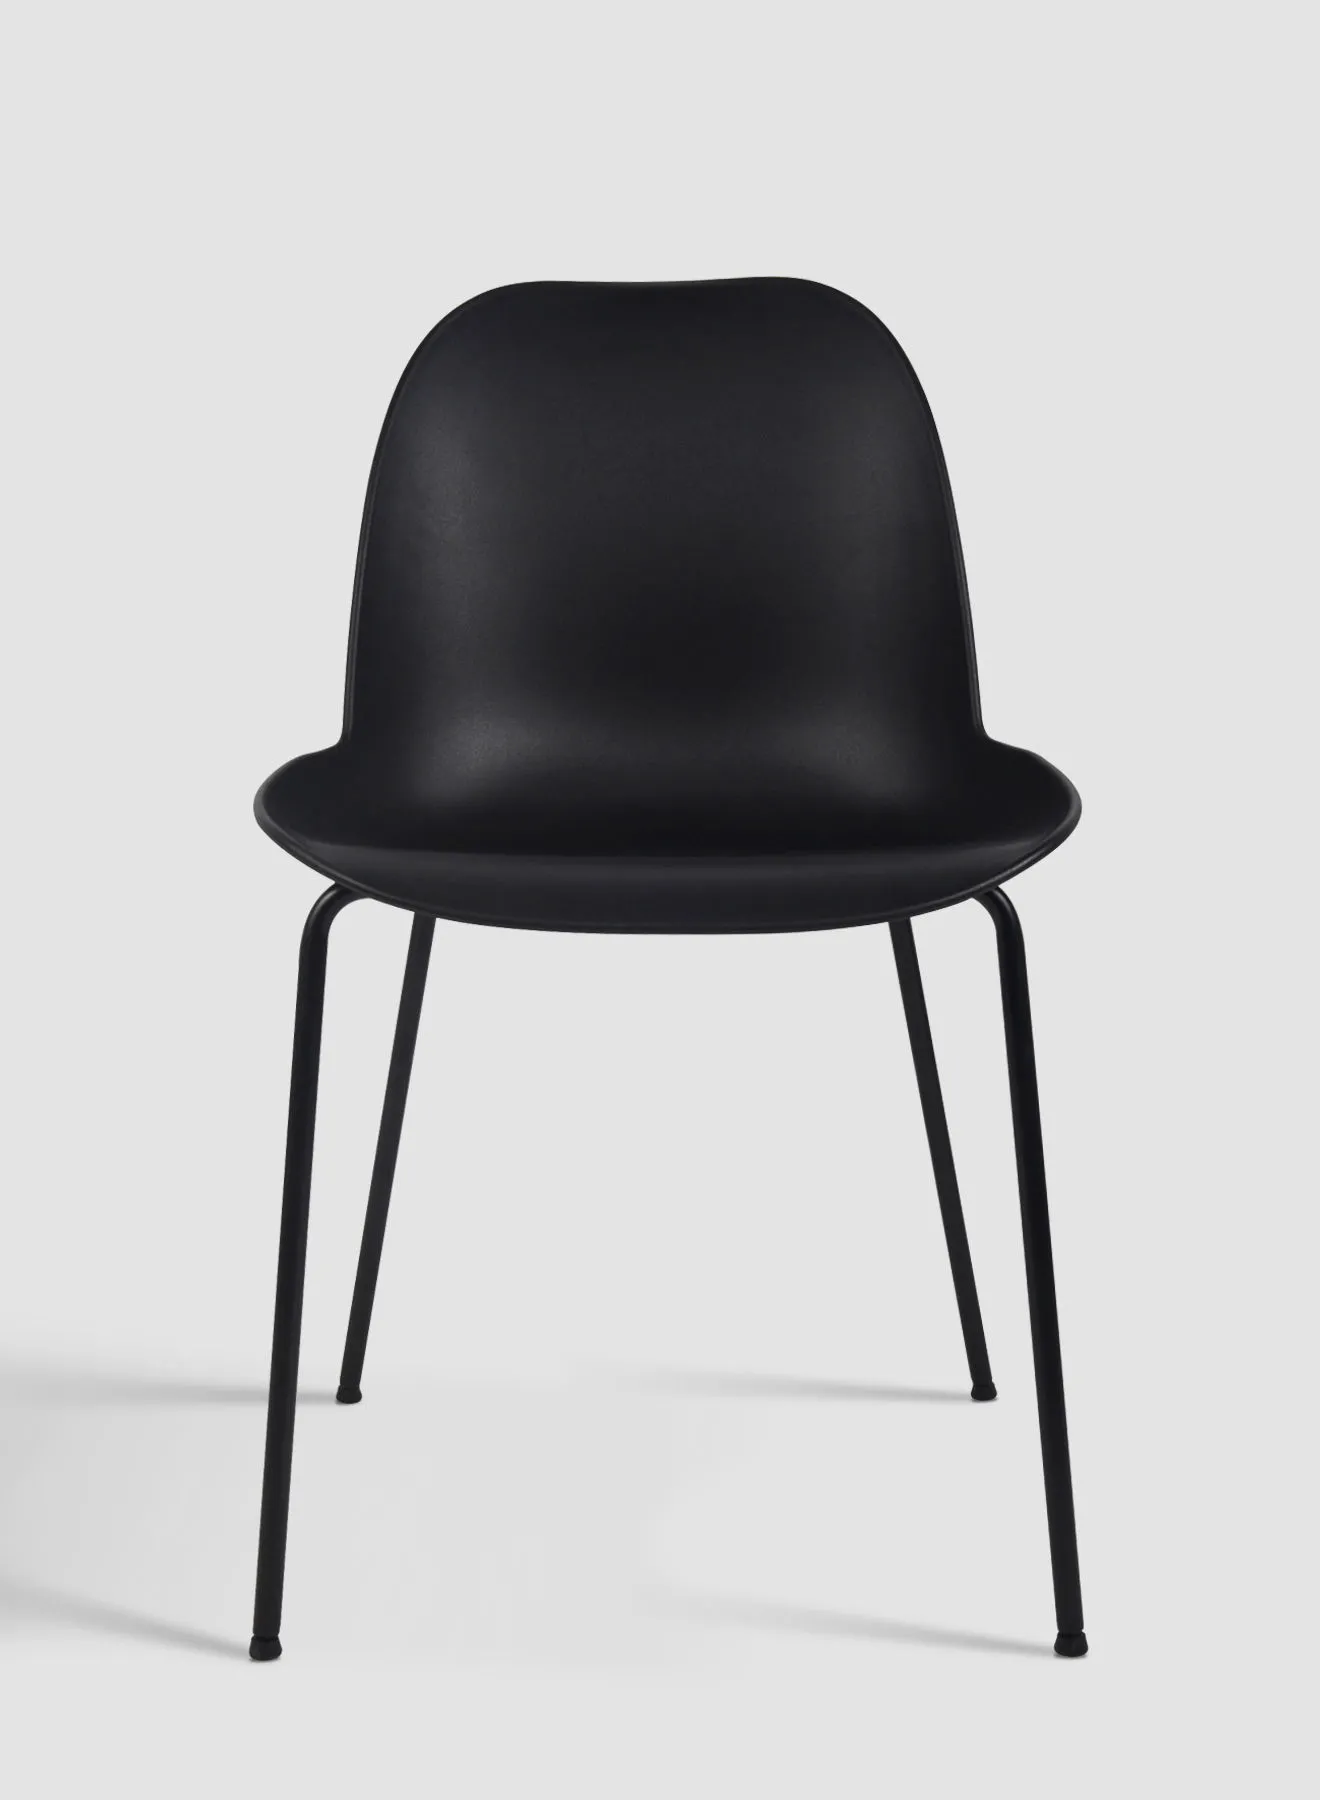 Switch Dining Chair In Black Plastic Chair Size L54.5 X W48.5 X H82